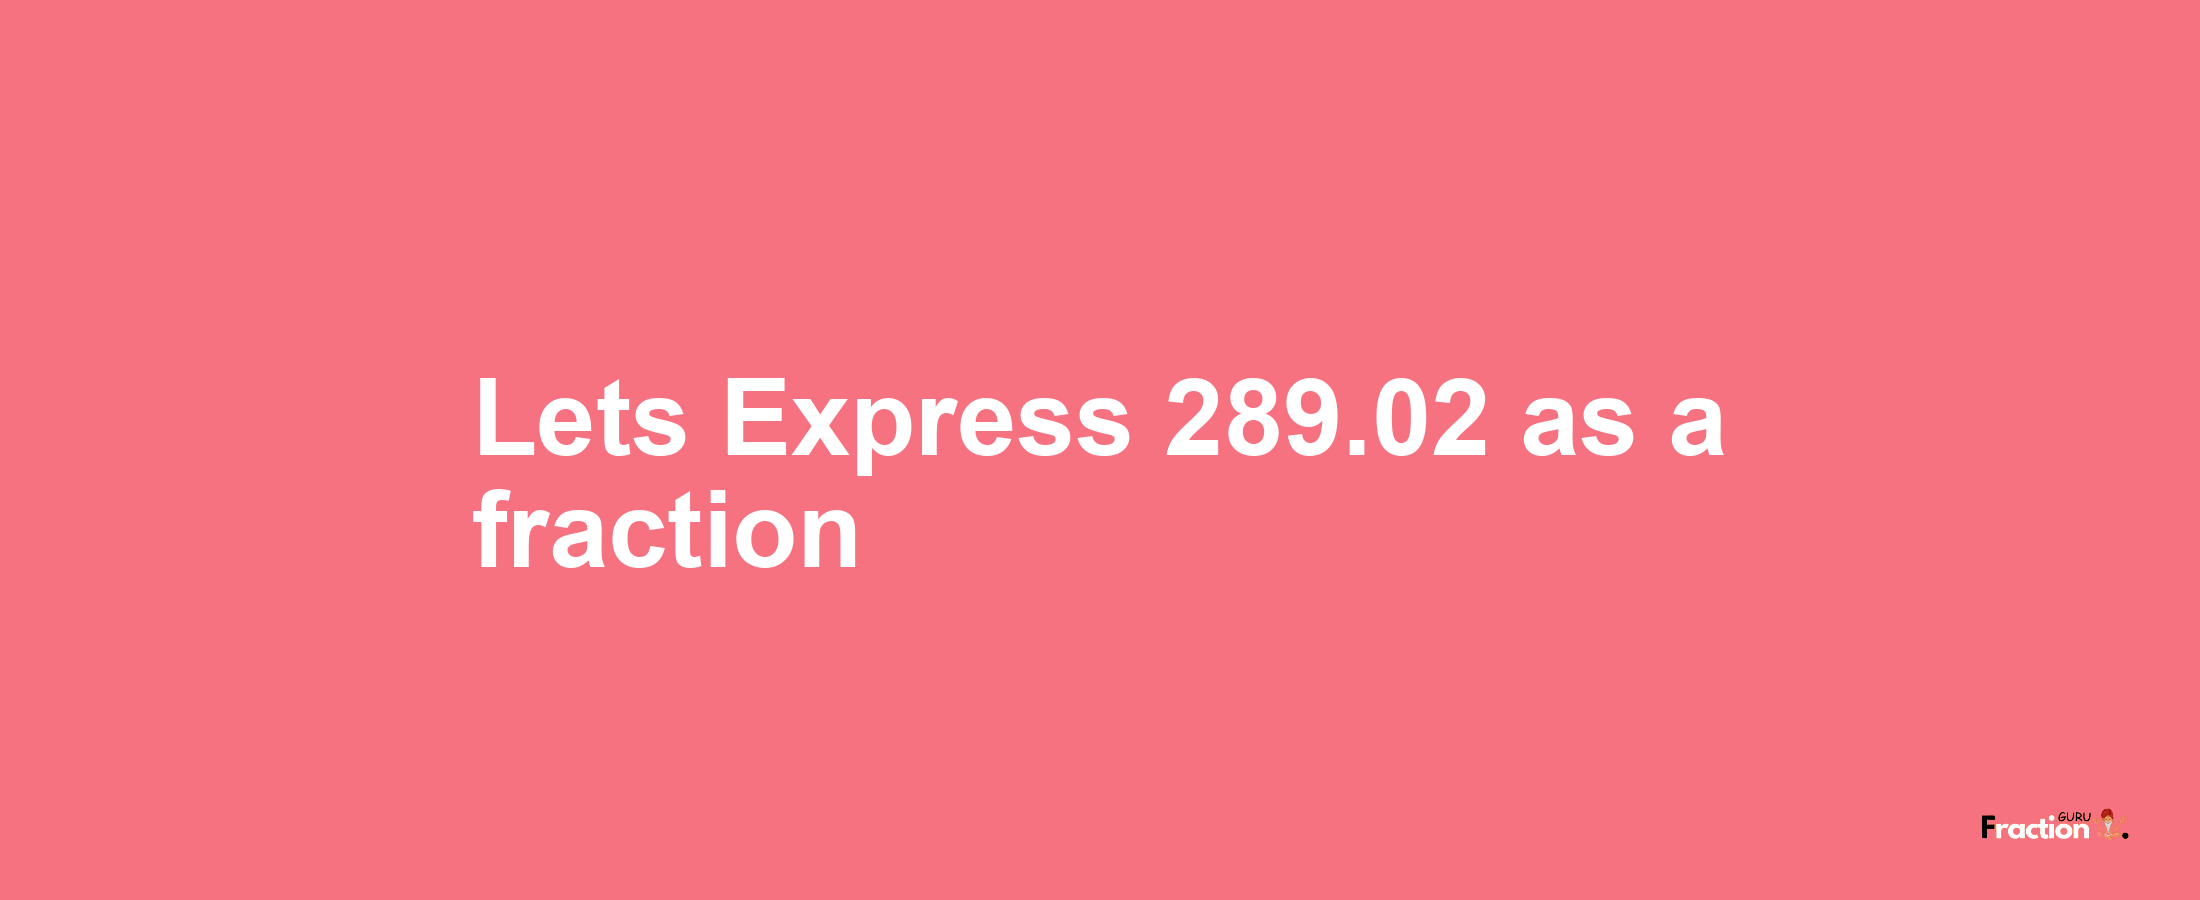 Lets Express 289.02 as afraction